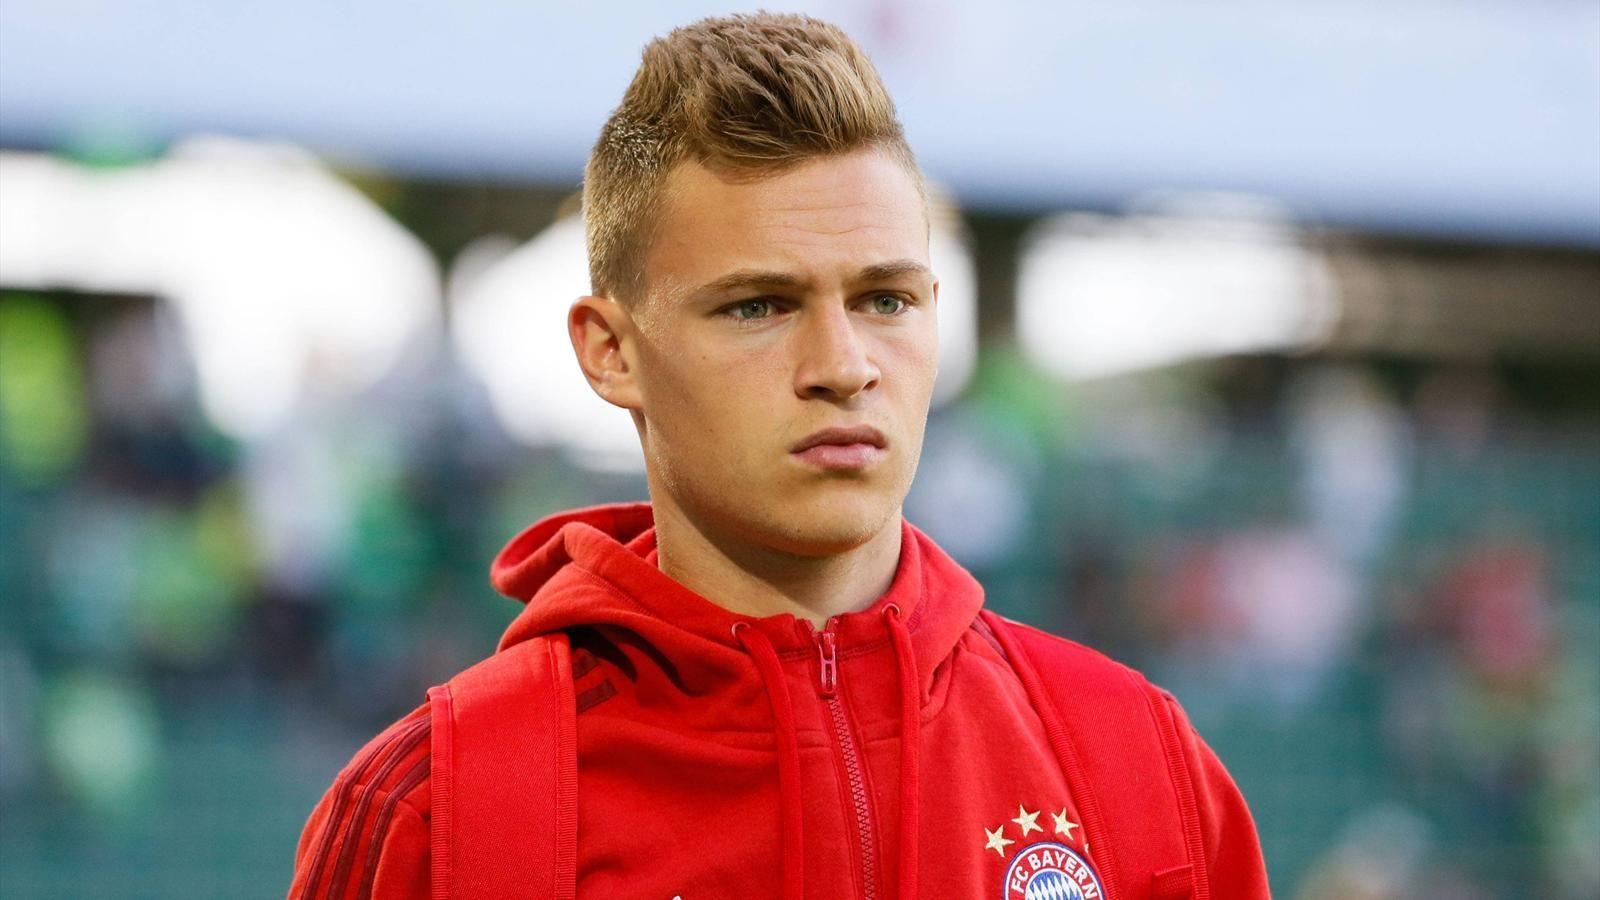 Joshua Kimmich: The Bayern Munich Ace Has the World at His Feet